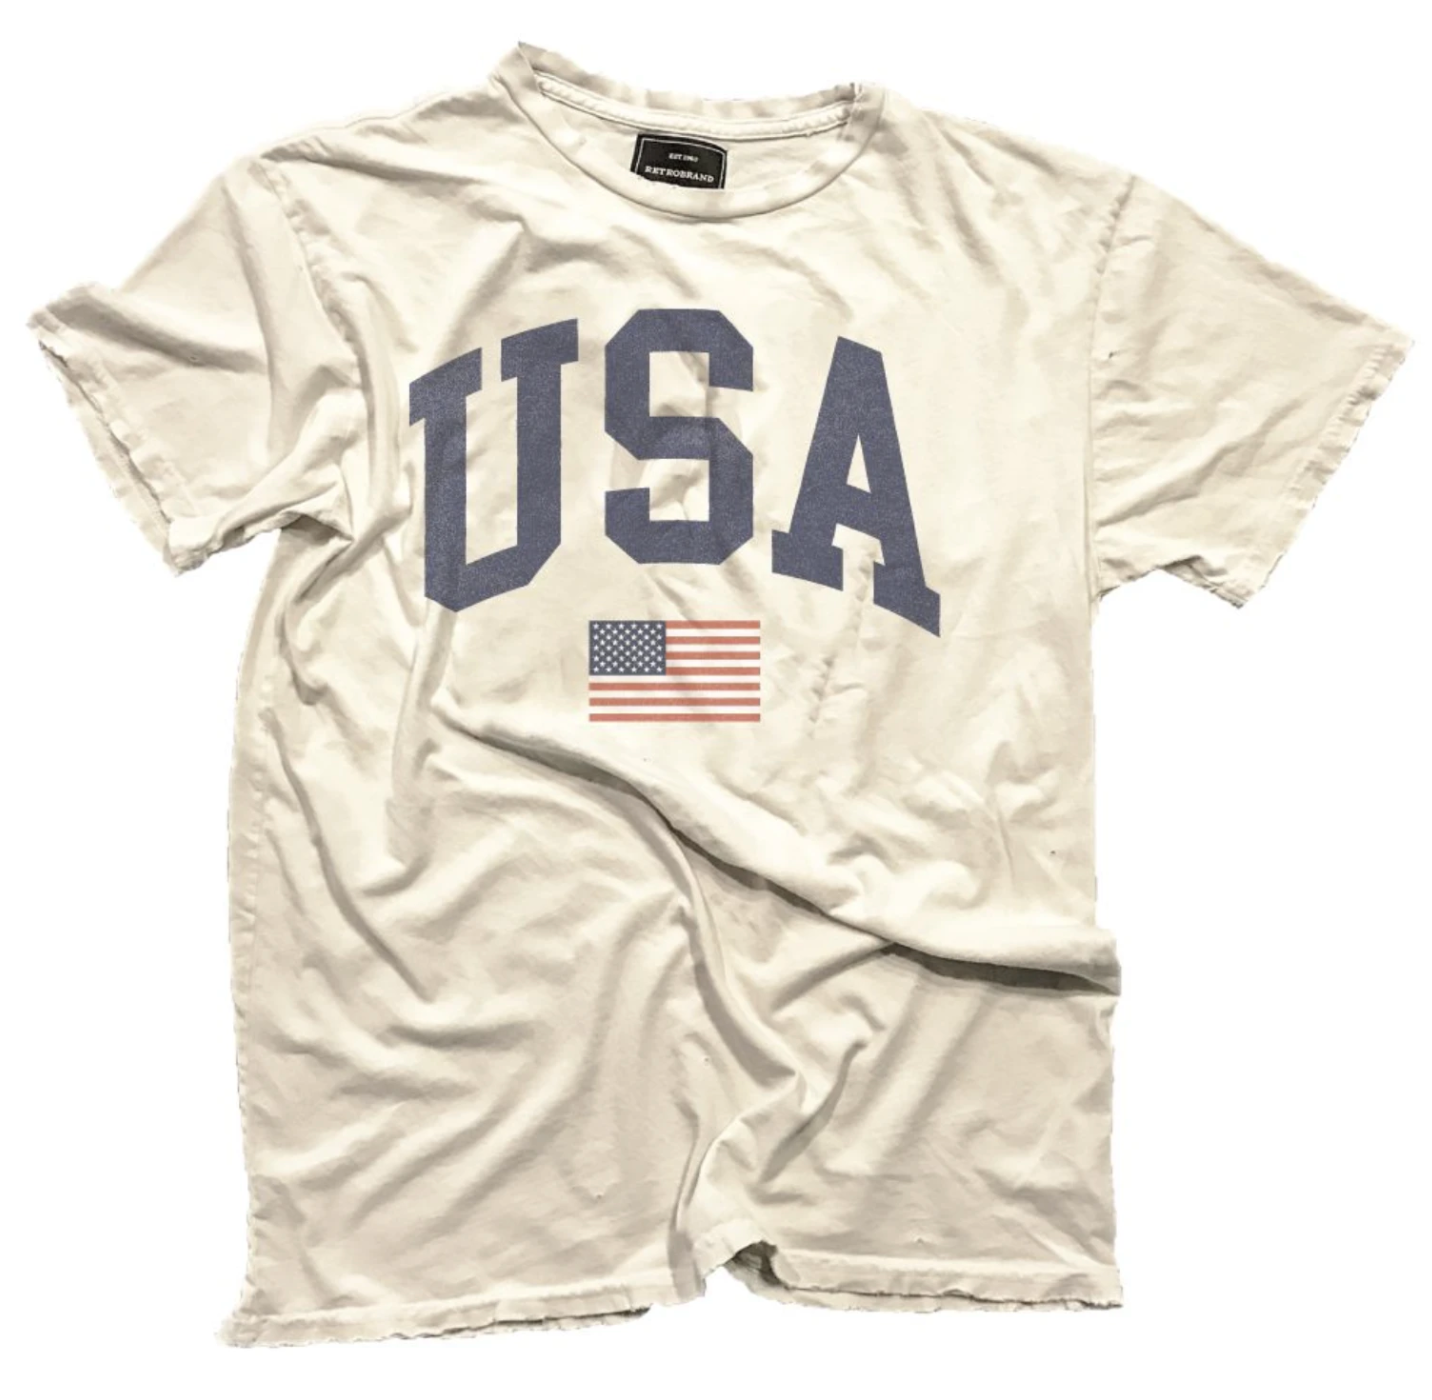 LONG SLEEVE PERFORMANCE PREMIUM T, Black with Printed Logo & US Flag o –  True Blue and Gold